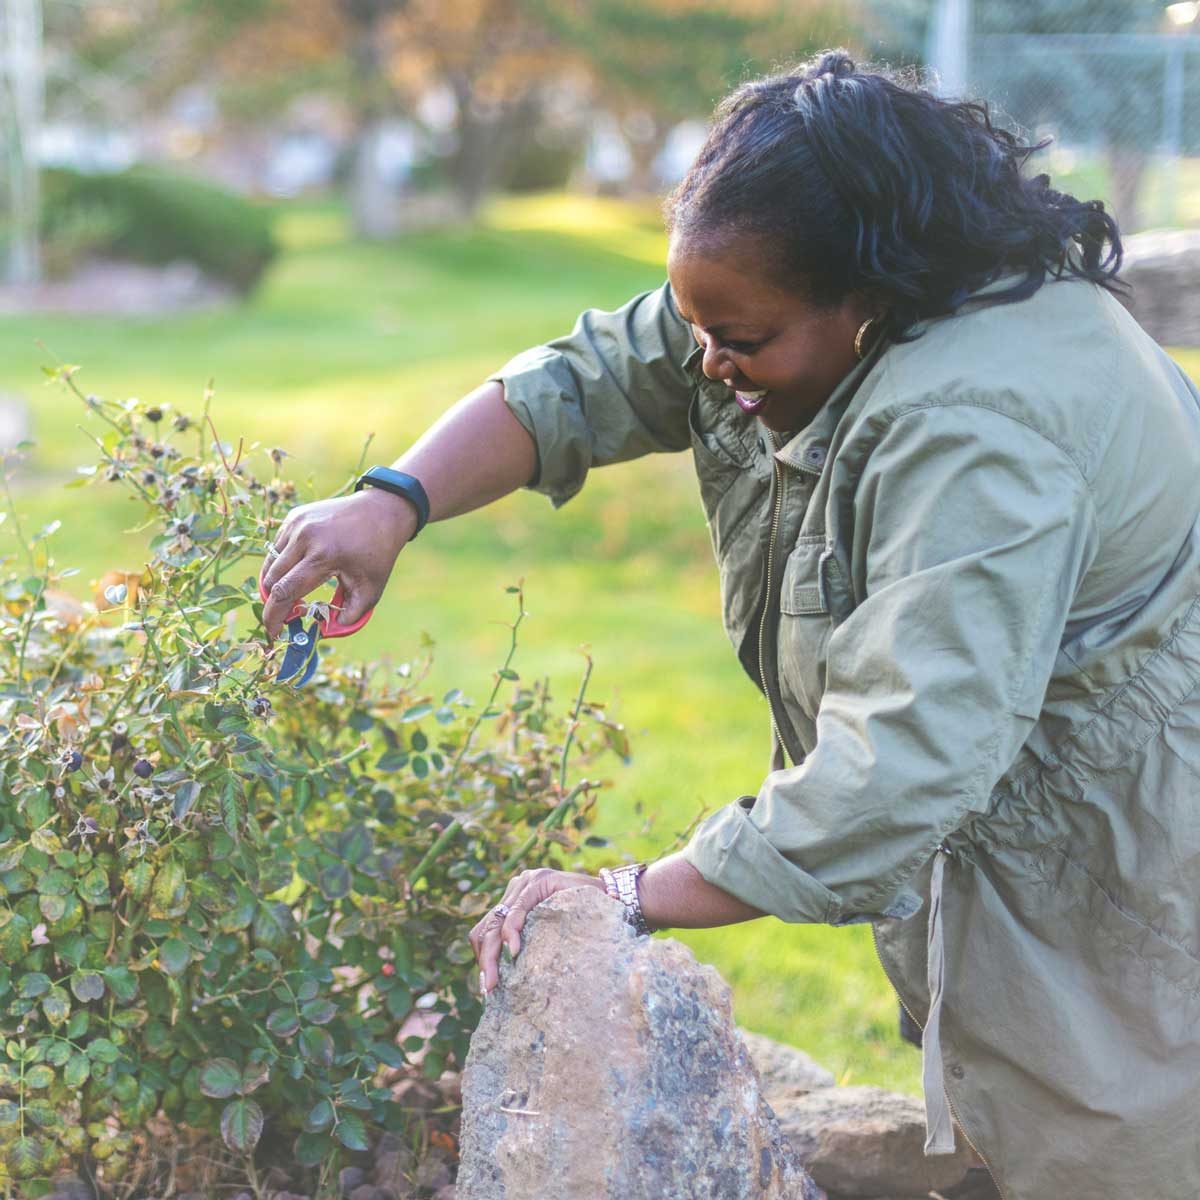 Woman trimming garden in the fall